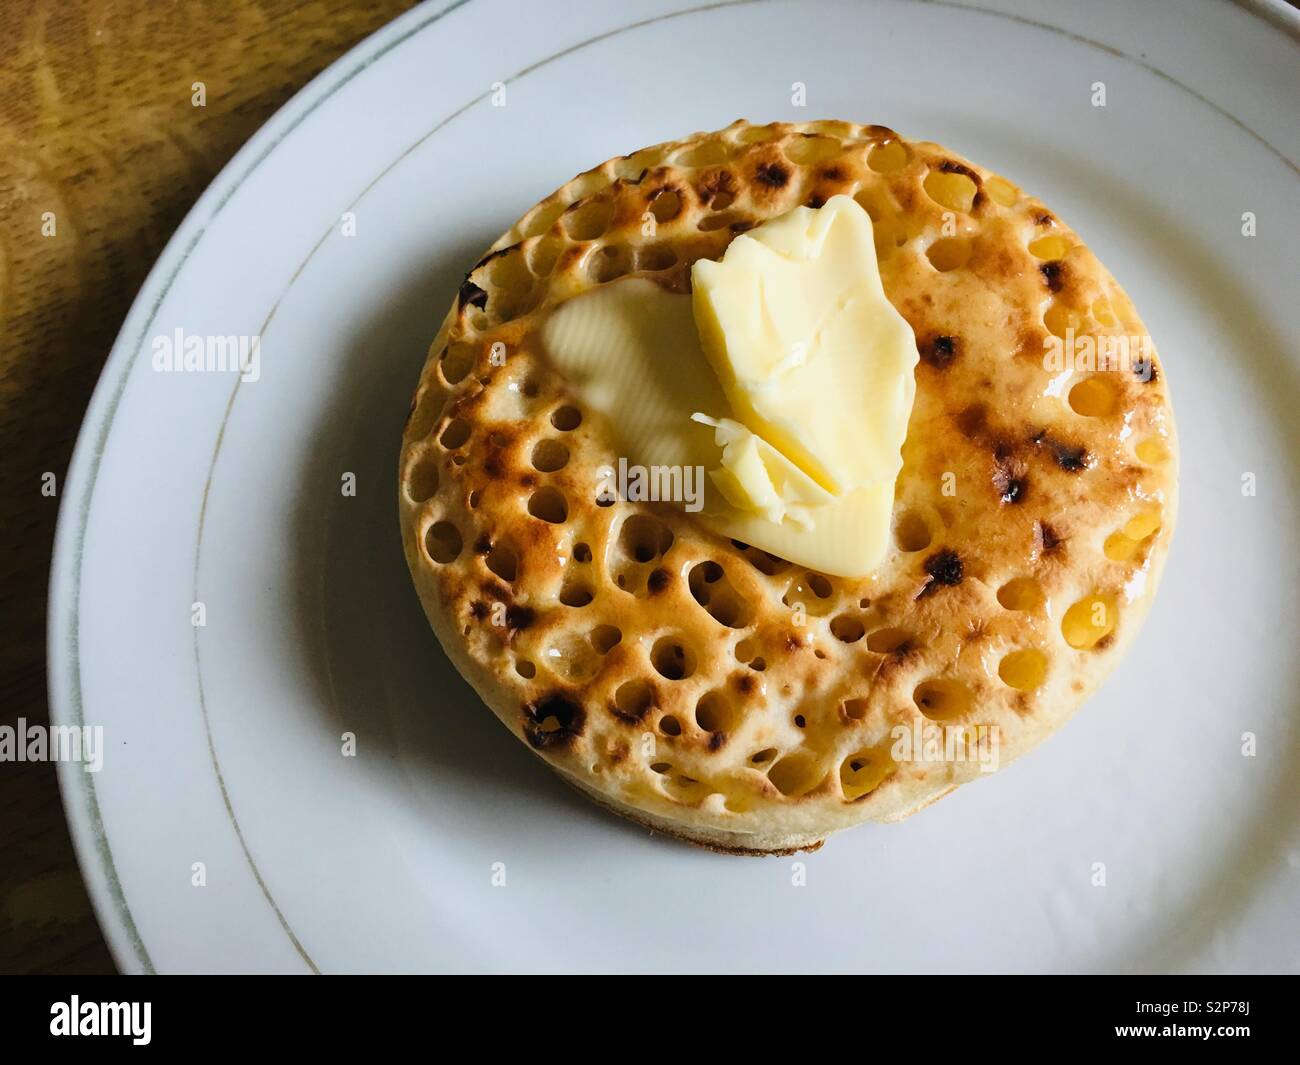 Butter on top of a crumpet Stock Photo